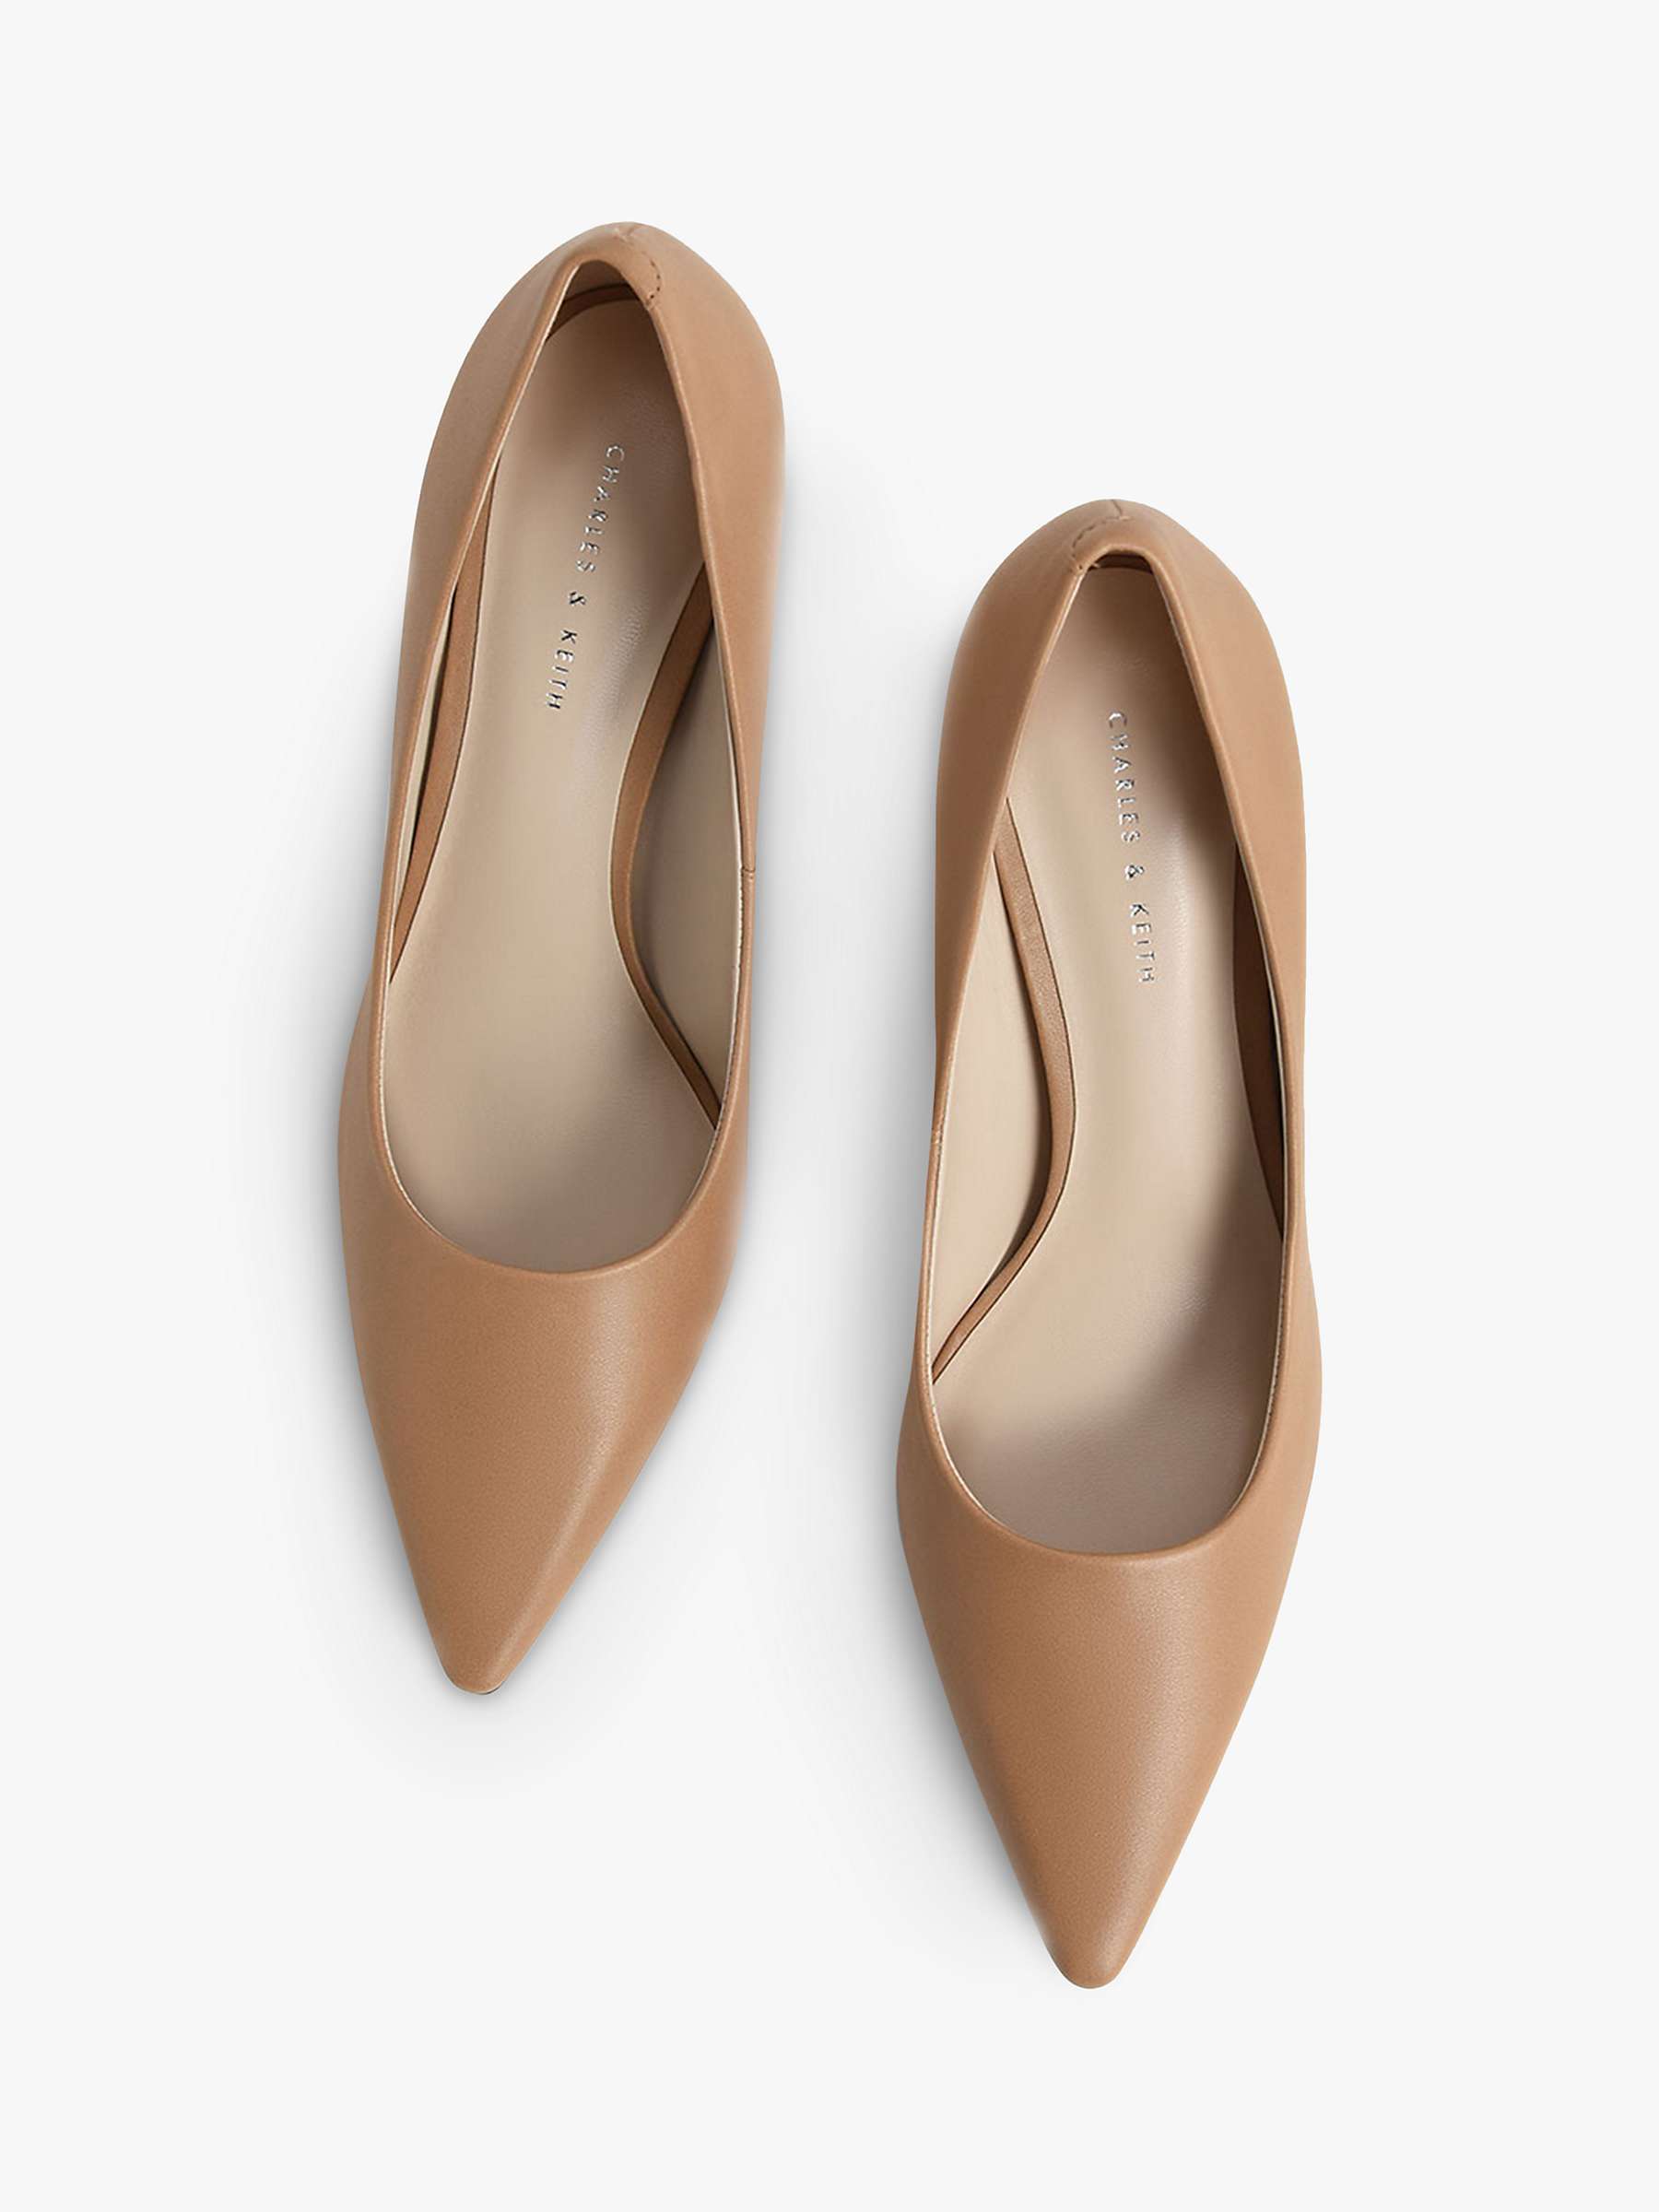 Buy CHARLES & KEITH Spool Heel Court Shoes Online at johnlewis.com